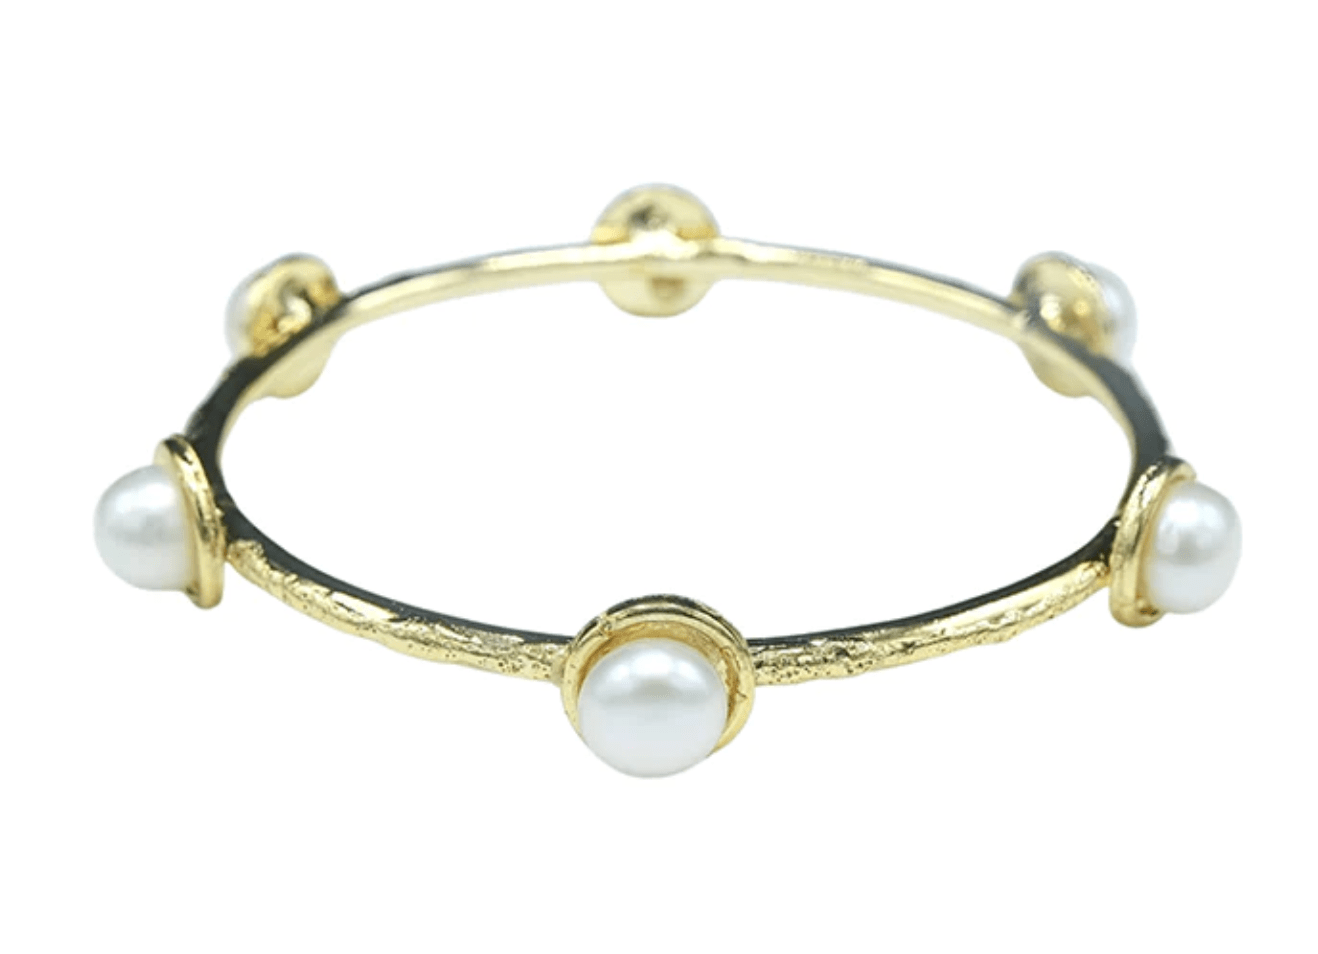 Hammered Gold Bangle with 6 Petite Pearls - The French Shoppe